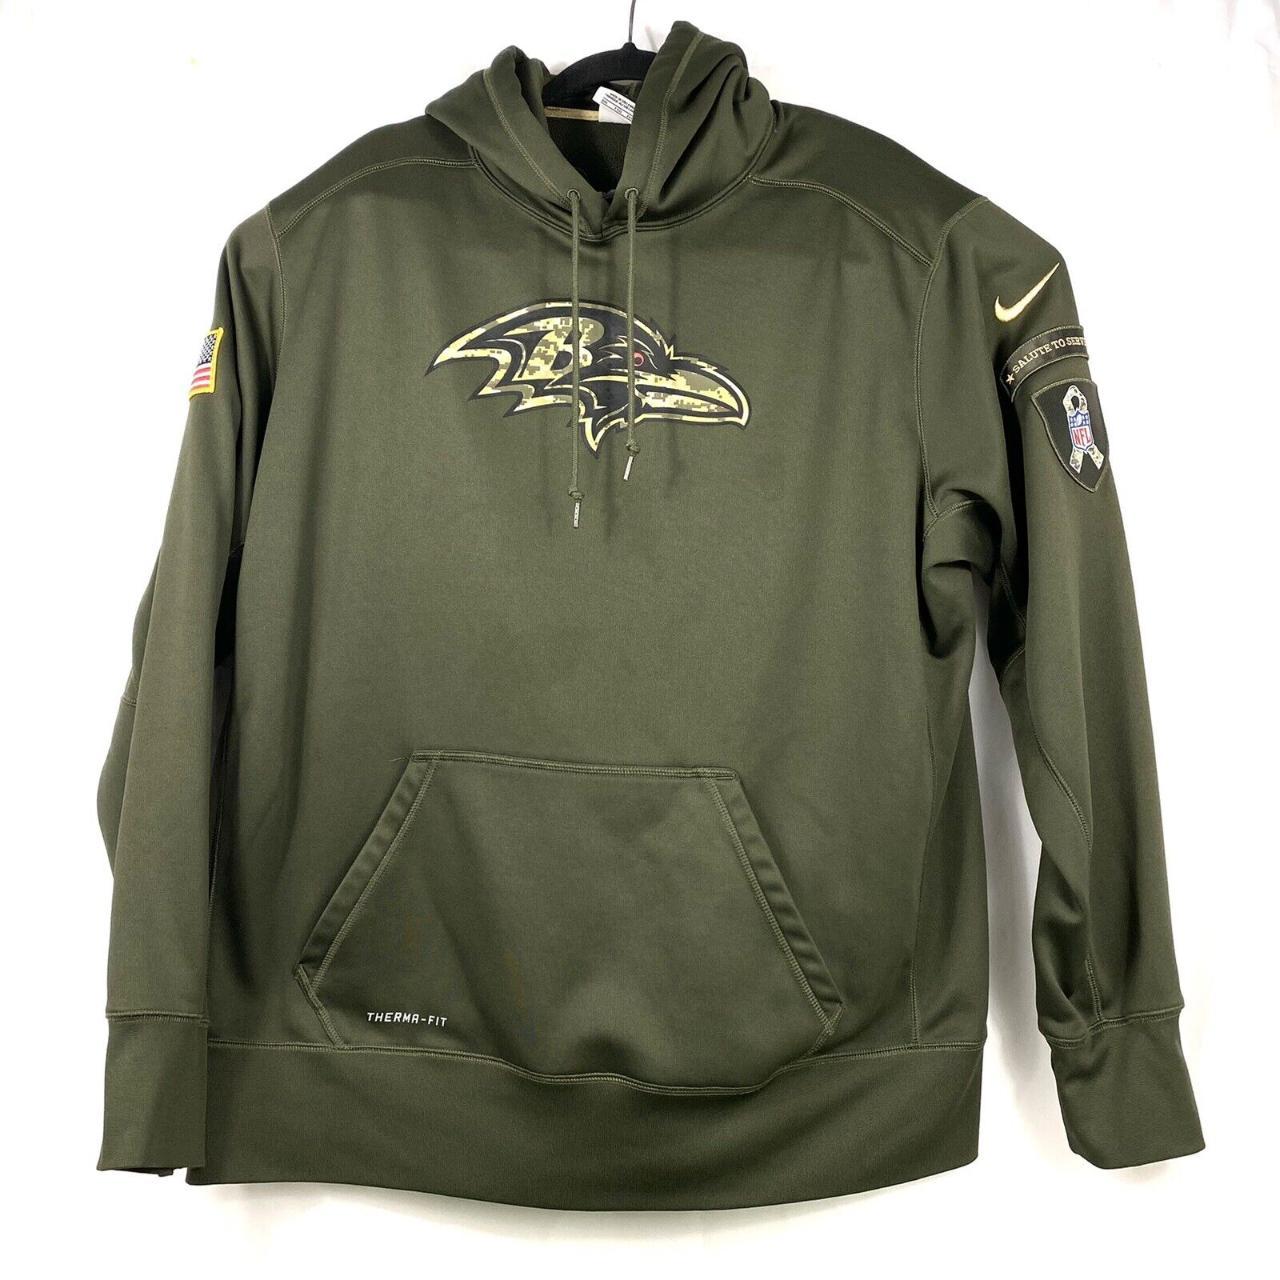 Nike Therma Fit Baltimore Ravens Salute to Service - Depop